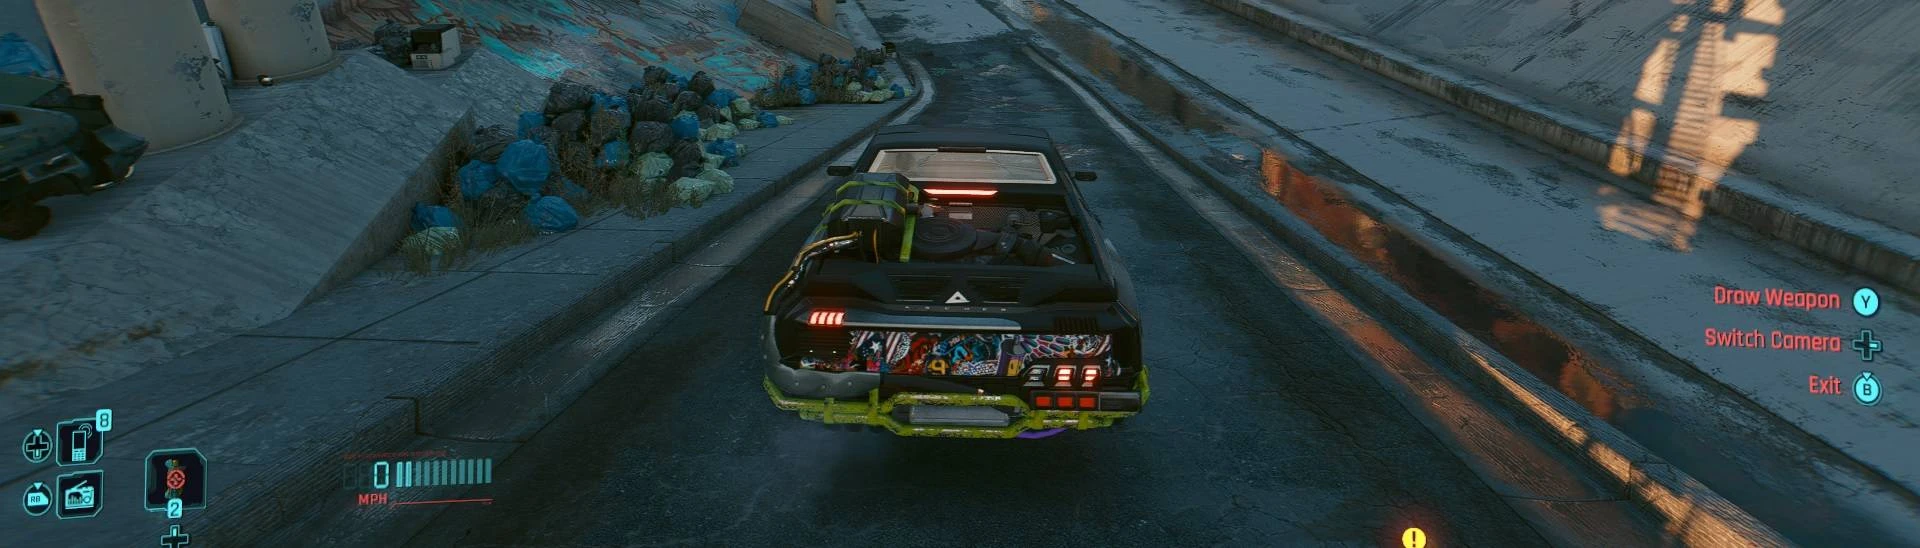 Cyberpunk 2077 2.0 Third Person: Is There a 3rd-Person Camera